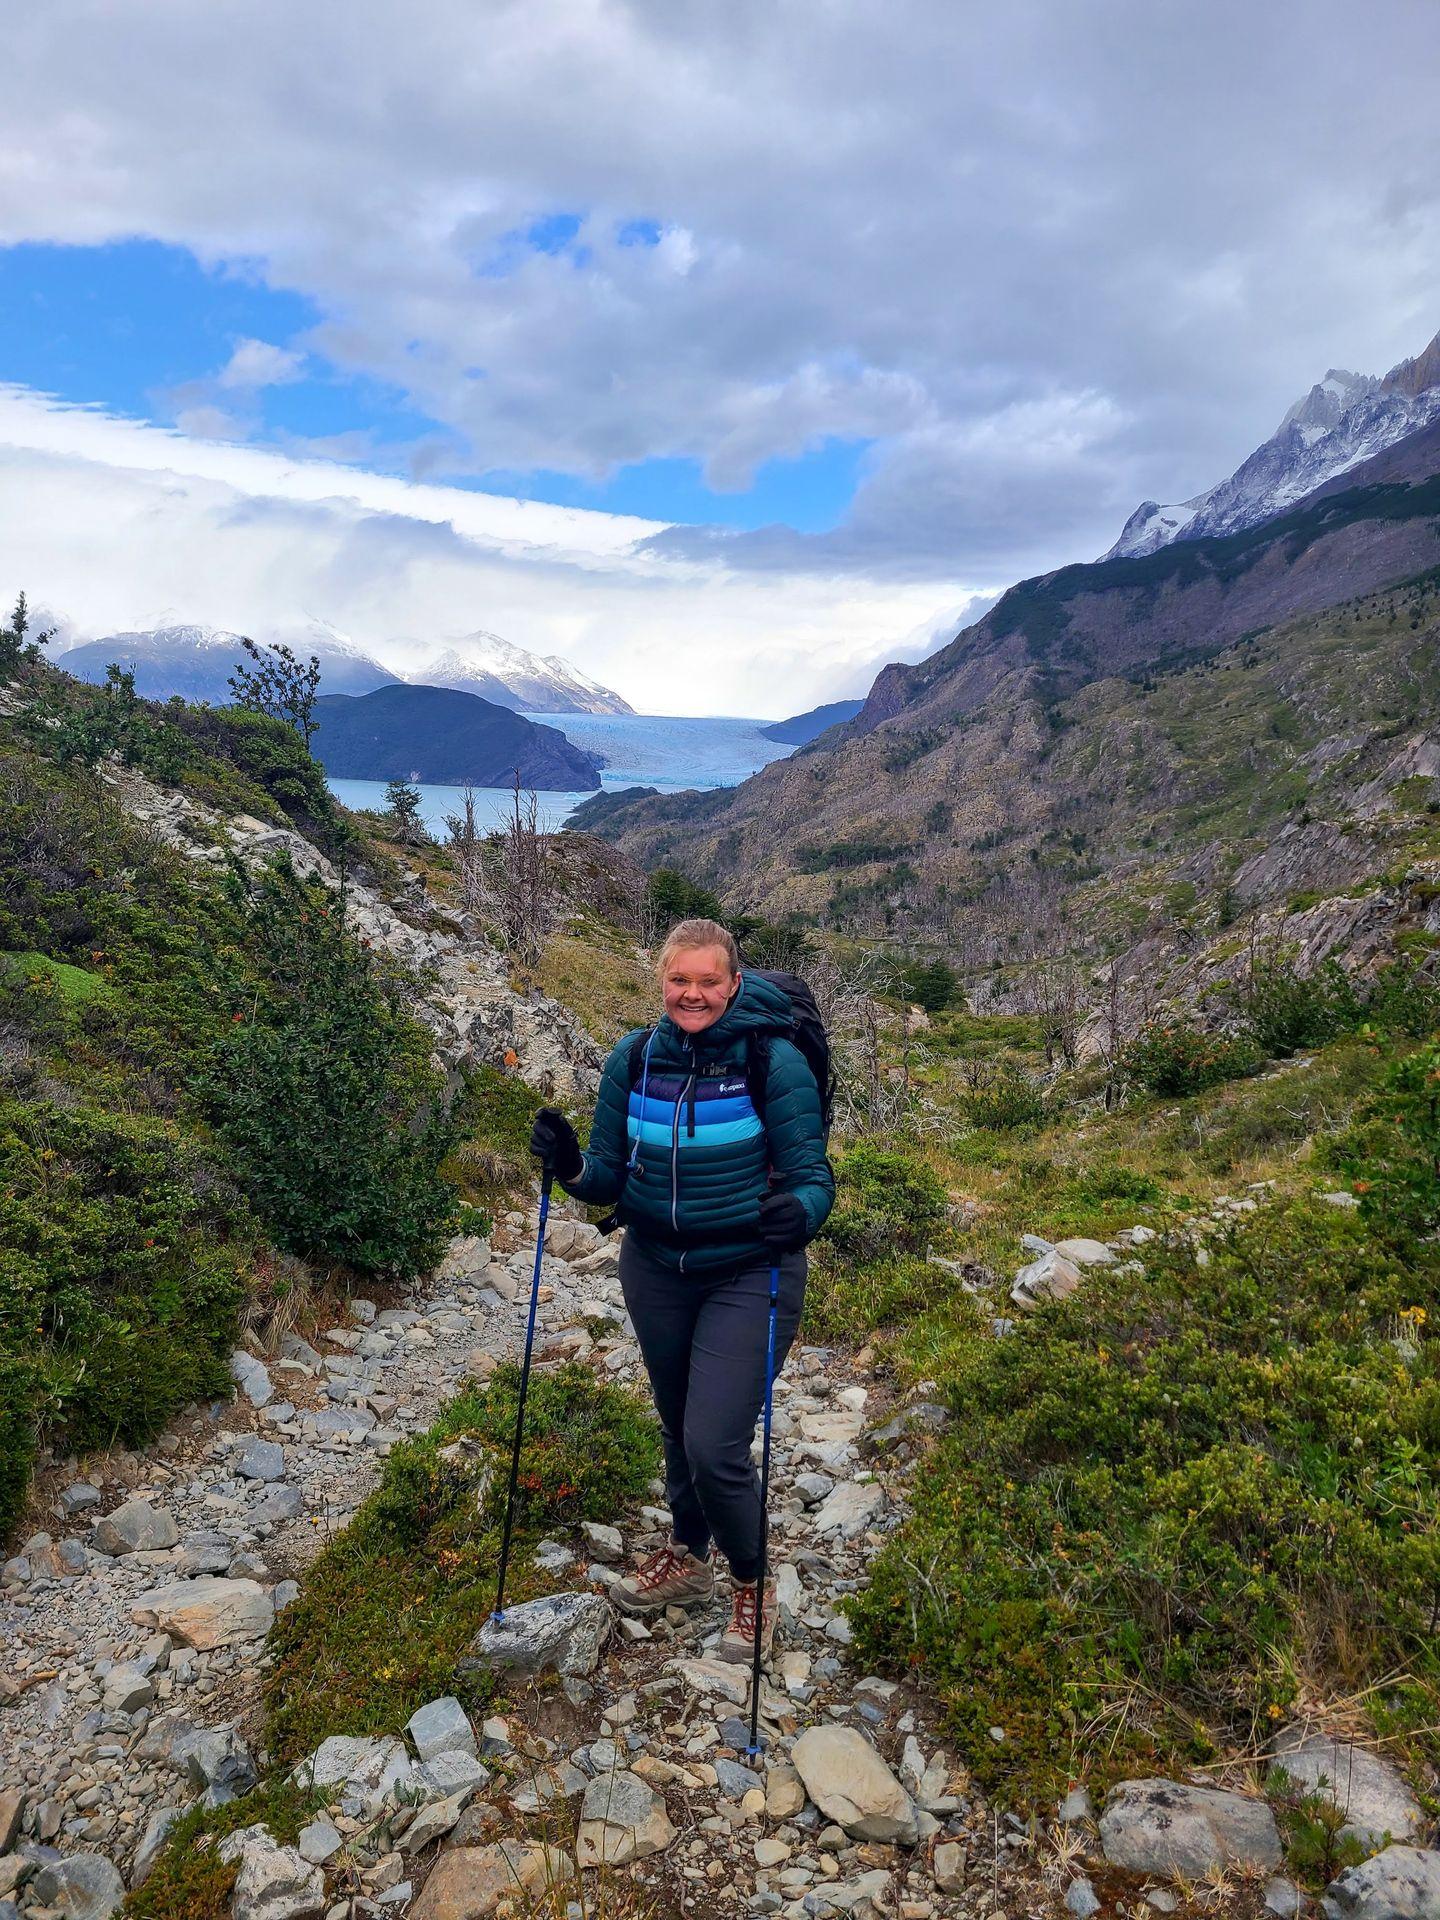 Lydia standing on a hiking trail with a view of the Grey Glacier in the distance.